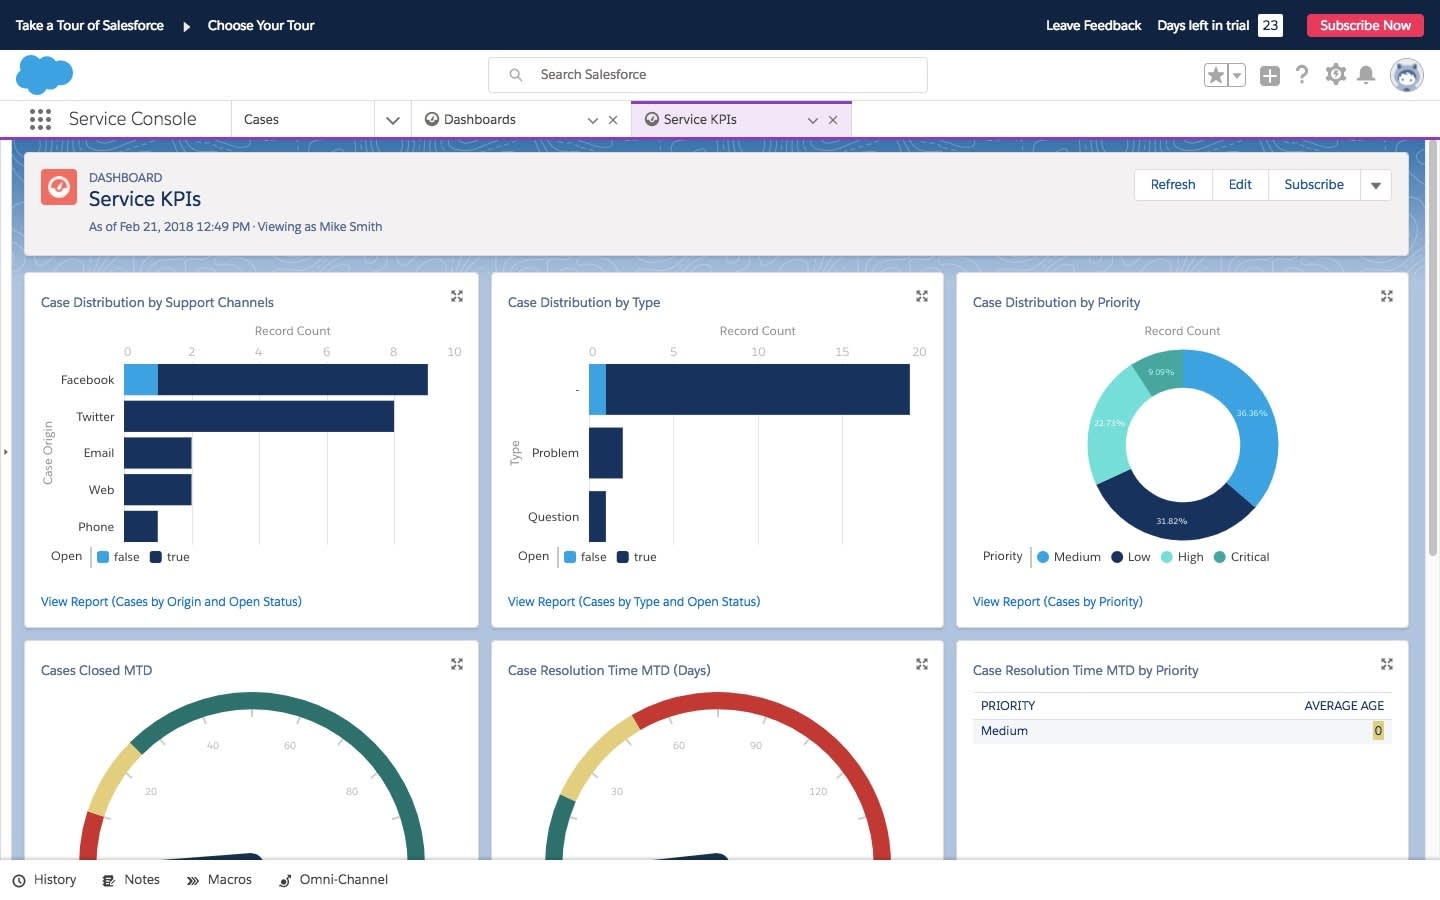 A dashboard showing service Key Performance Indicators in Salesforce